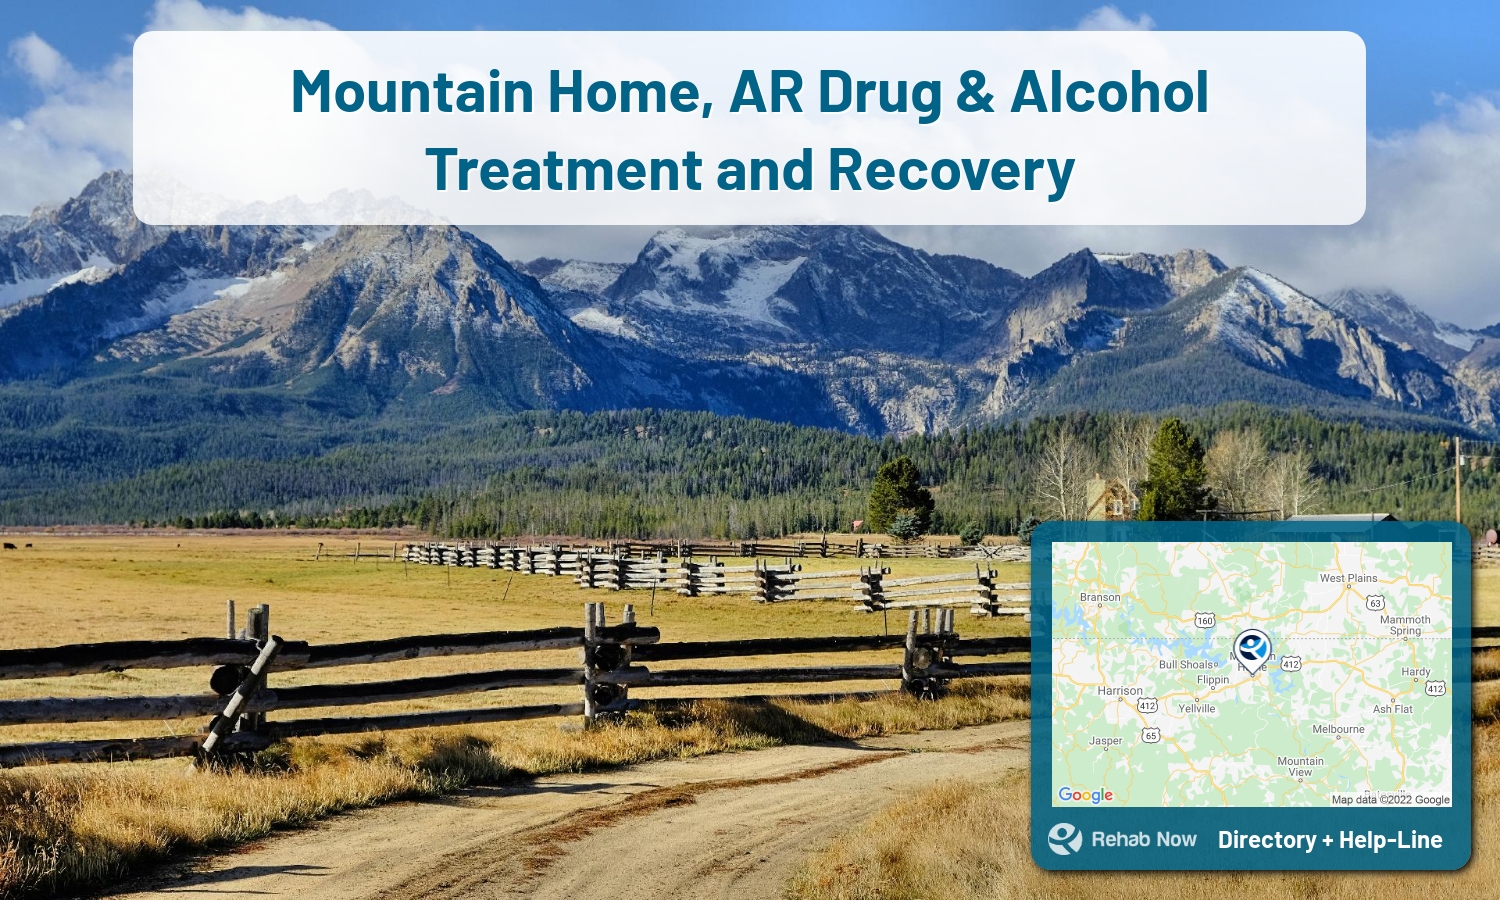 Mountain Home, AR Treatment Centers. Find drug rehab in Mountain Home, Arkansas, or detox and treatment programs. Get the right help now!